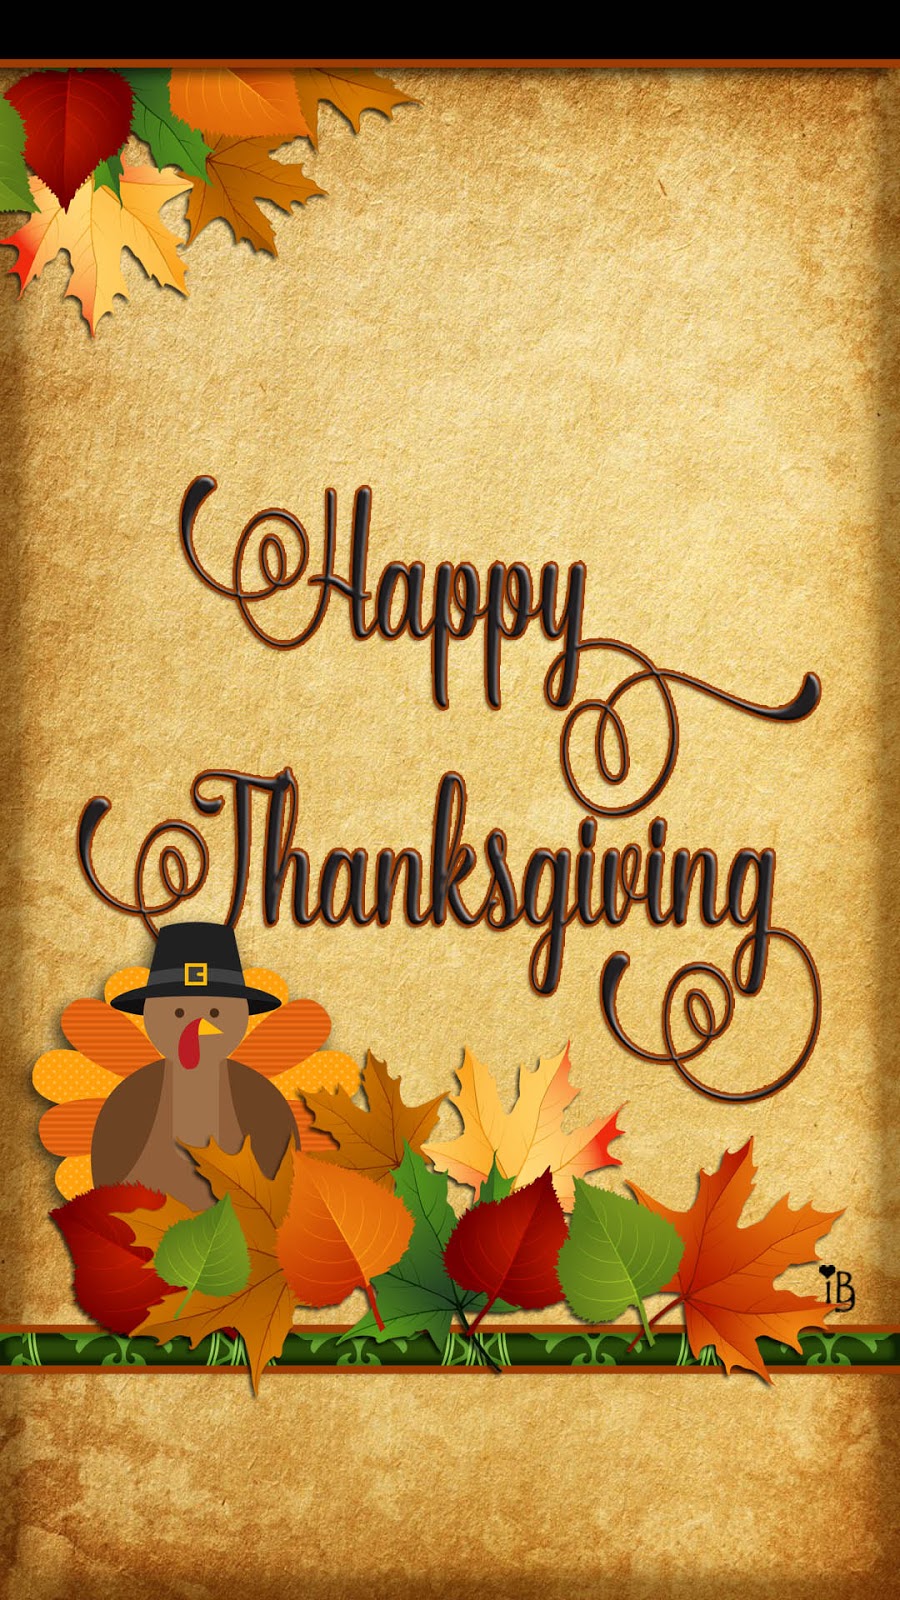 Thanksgiving For iphone Wallpaper - NawPic